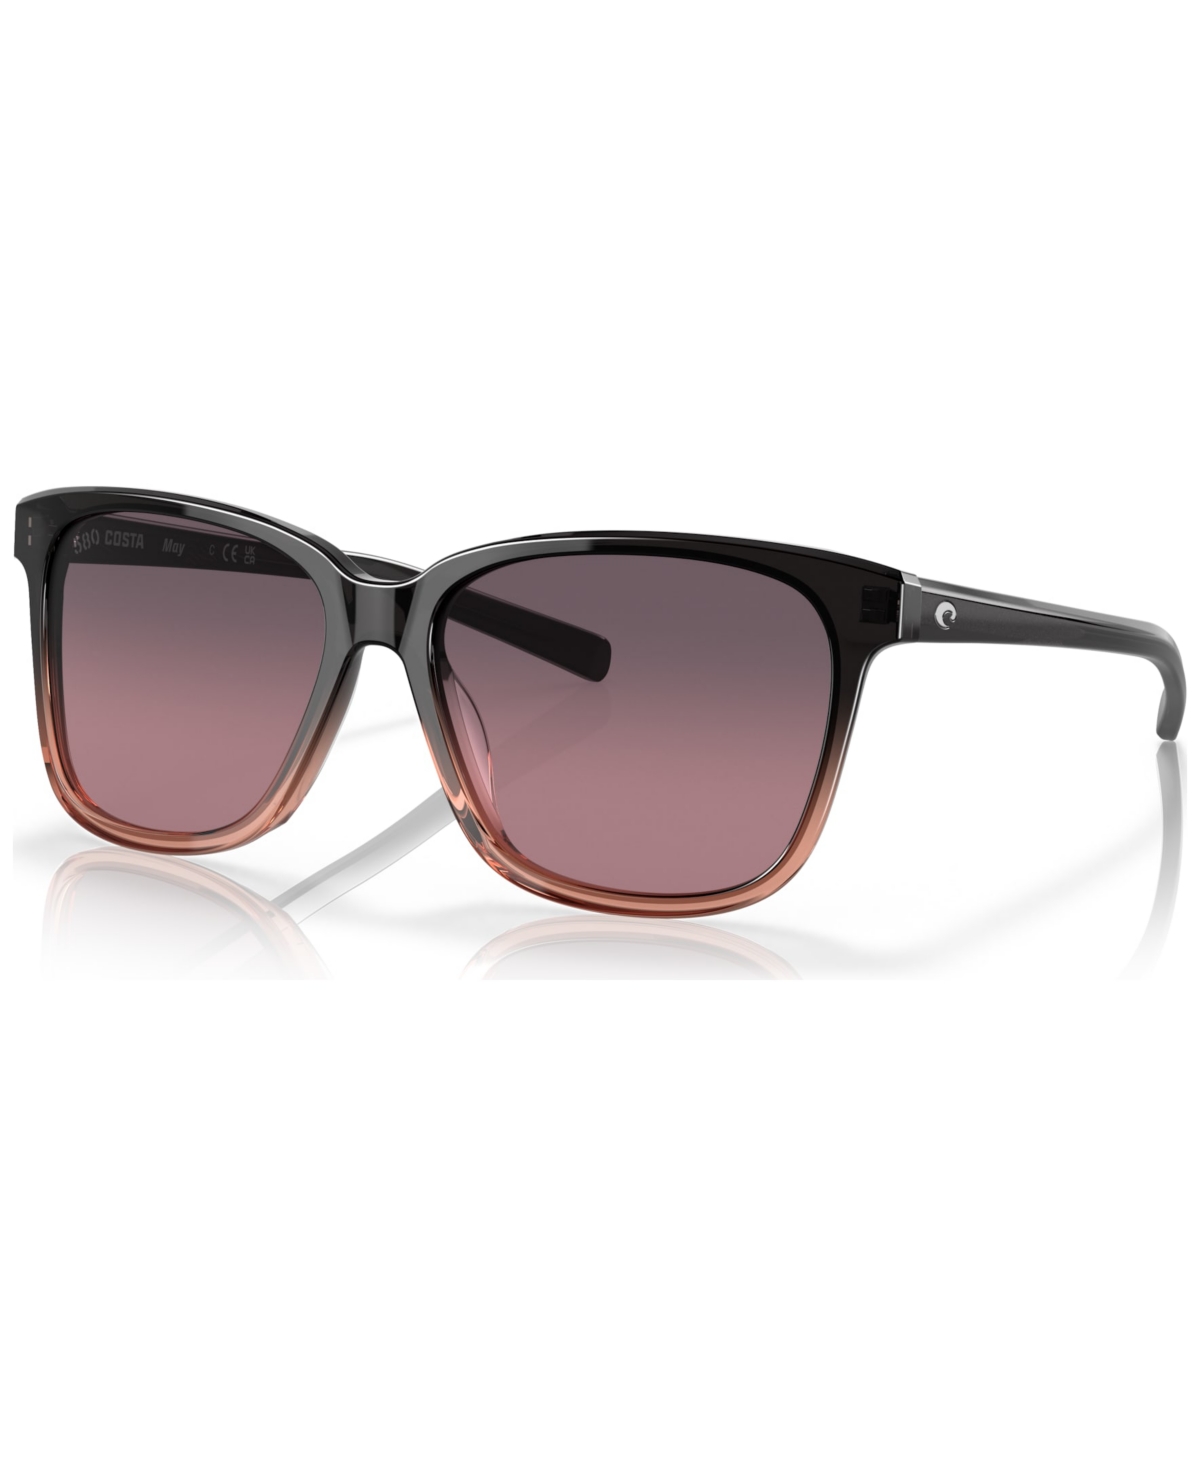 Costa Del Mar Women's Polarized Sunglasses, May In Pink Sand